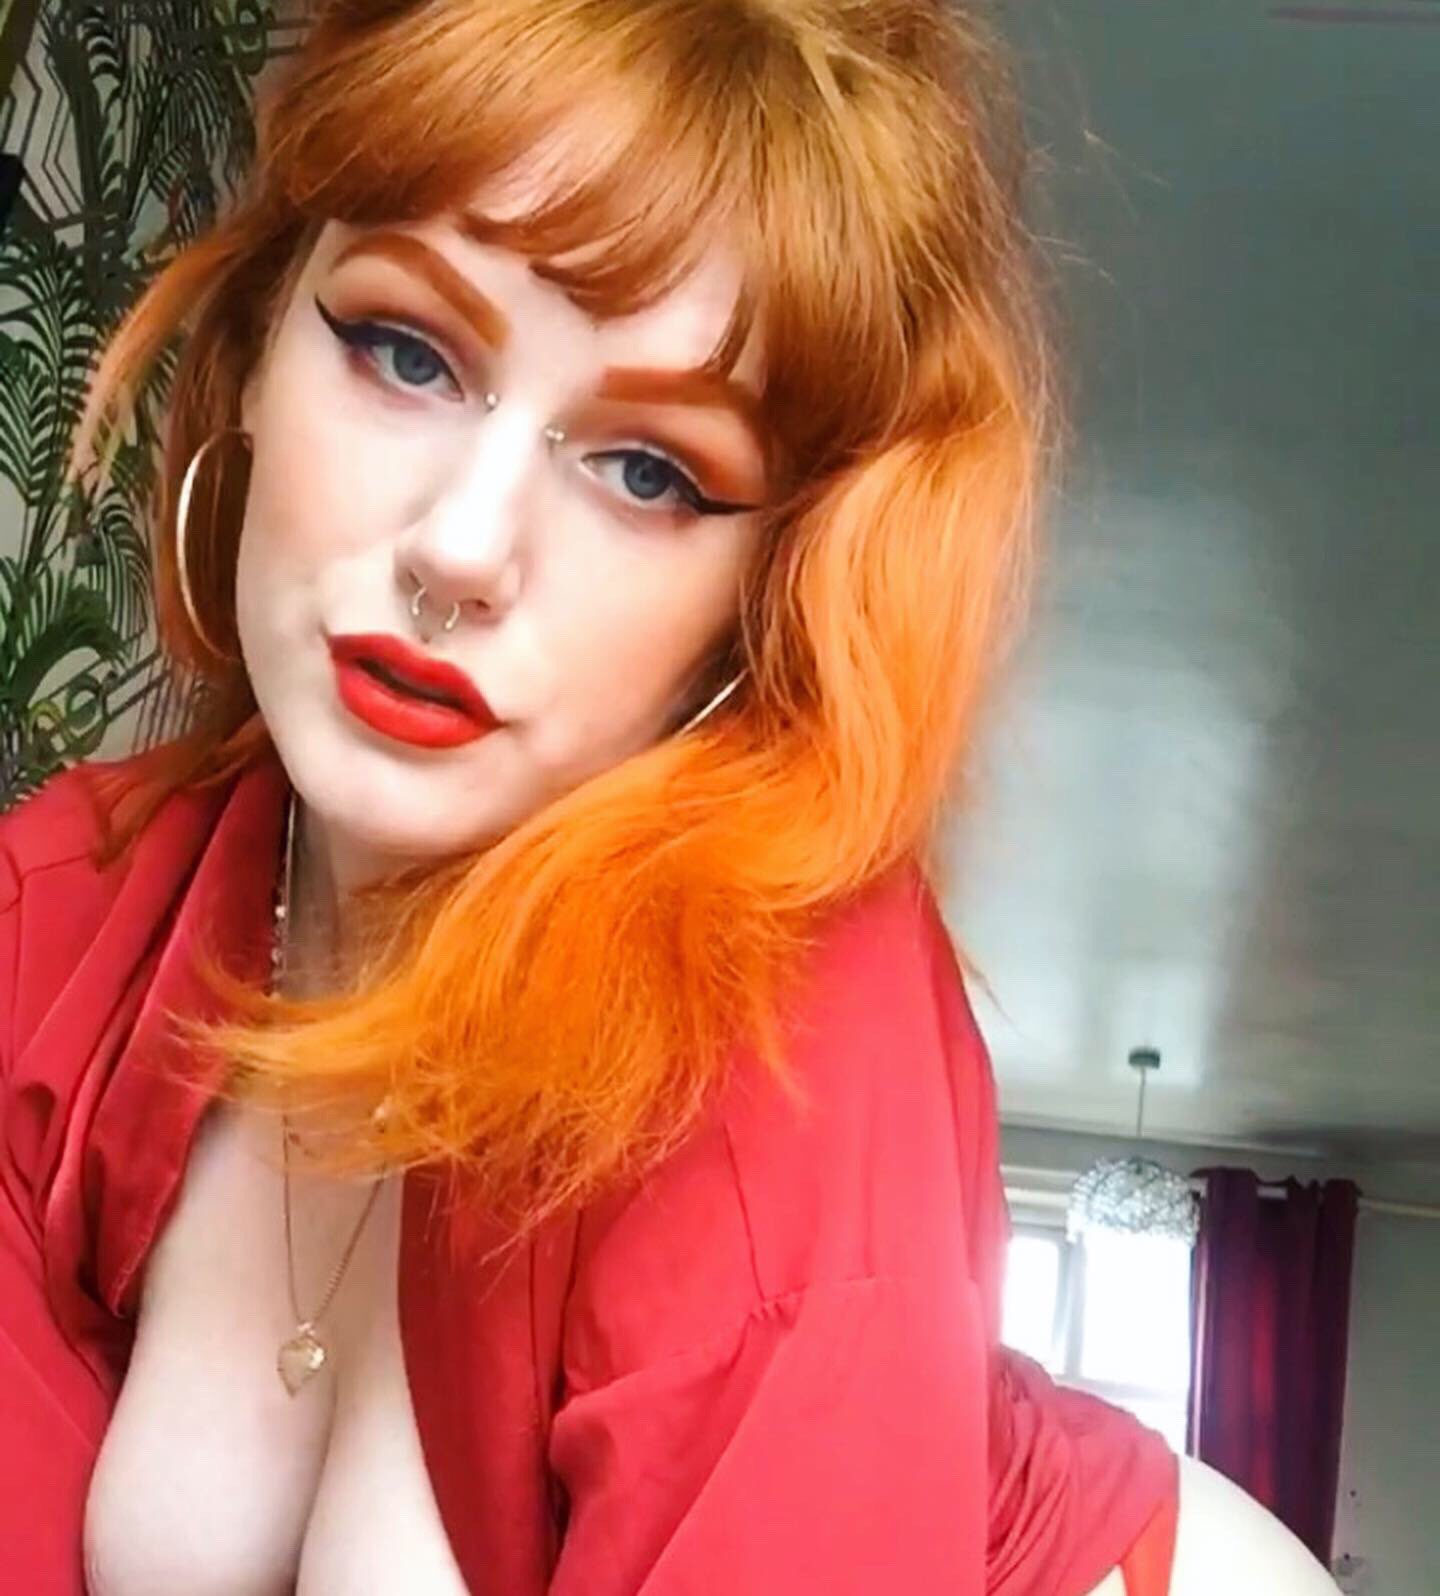 Onlyfans gingerspice  WEB-DL   Siterip Clip + selected Imagesets (nude) Siterip RIP